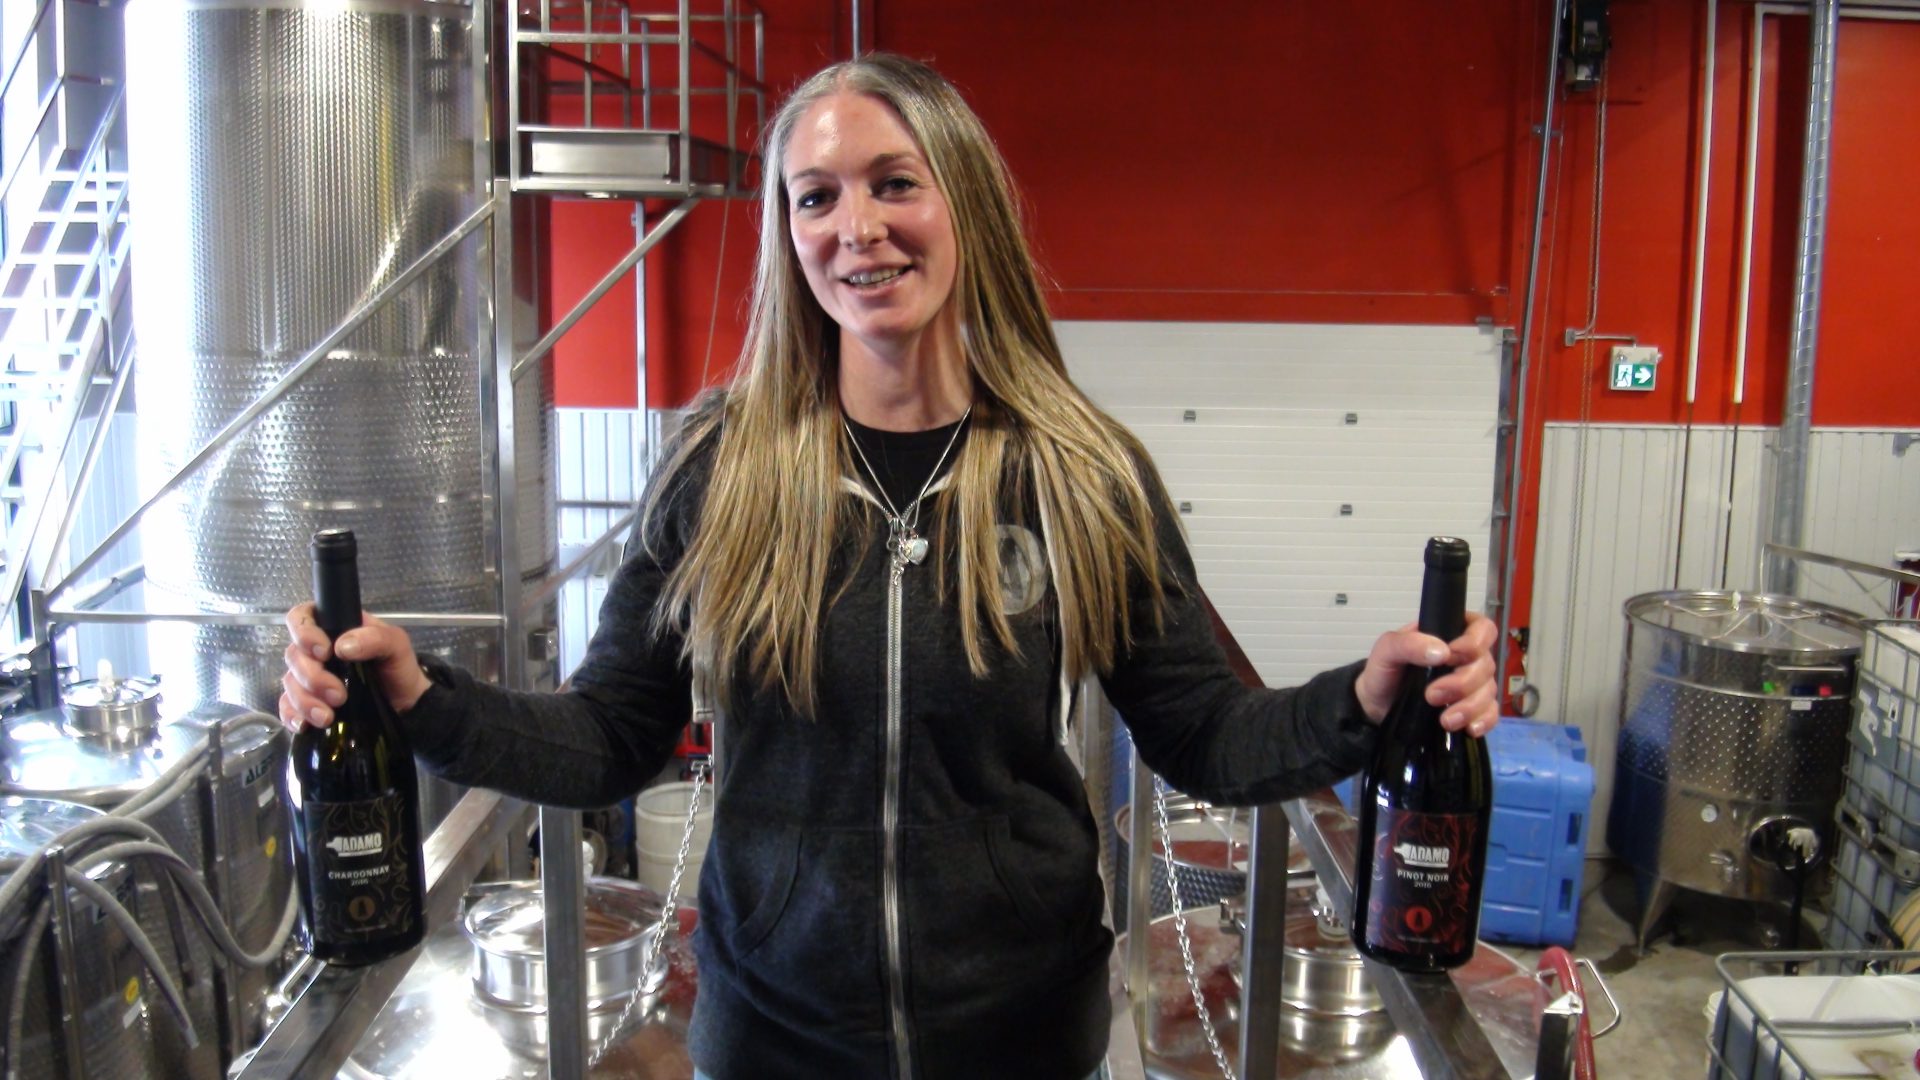 In Conversation With Shauna White, Winemaker at Adamo Estate Winery